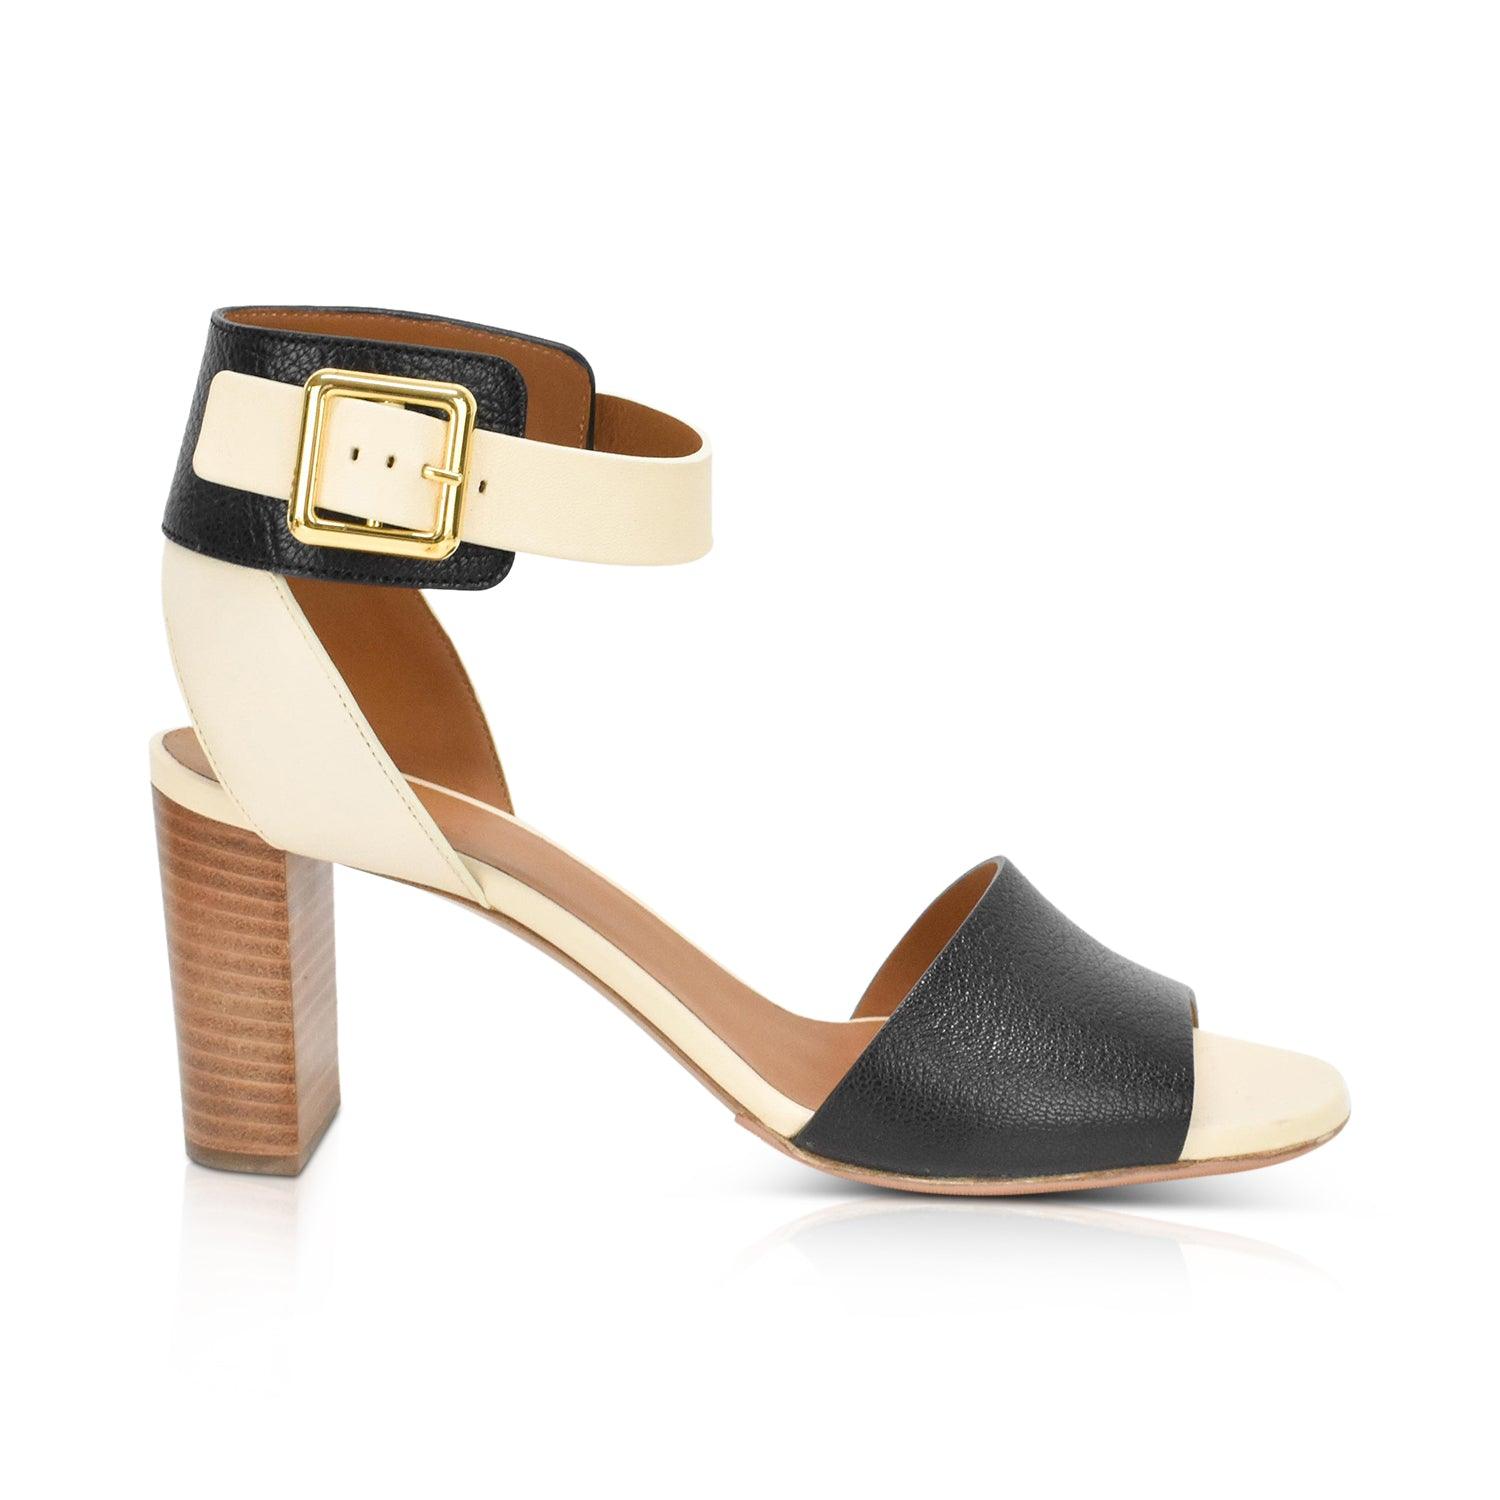 Chloe Sandals - Women's 36.5 - Fashionably Yours